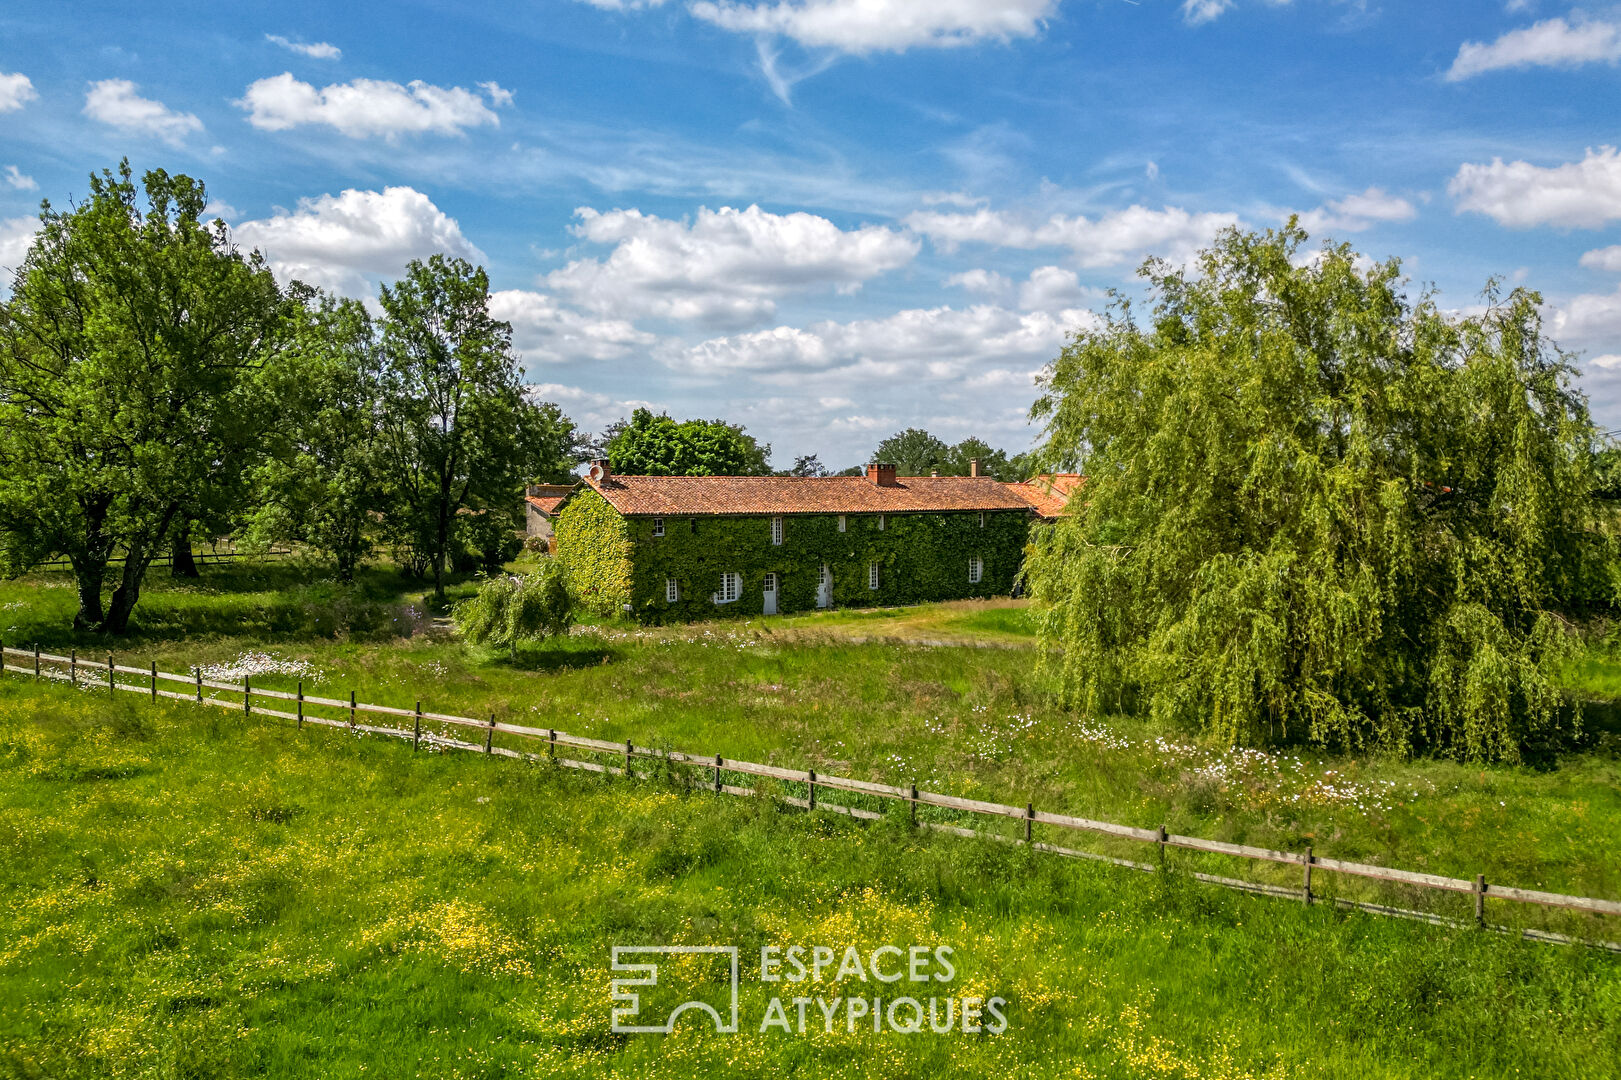 Bucolic Guest House with Park and Box for Horses